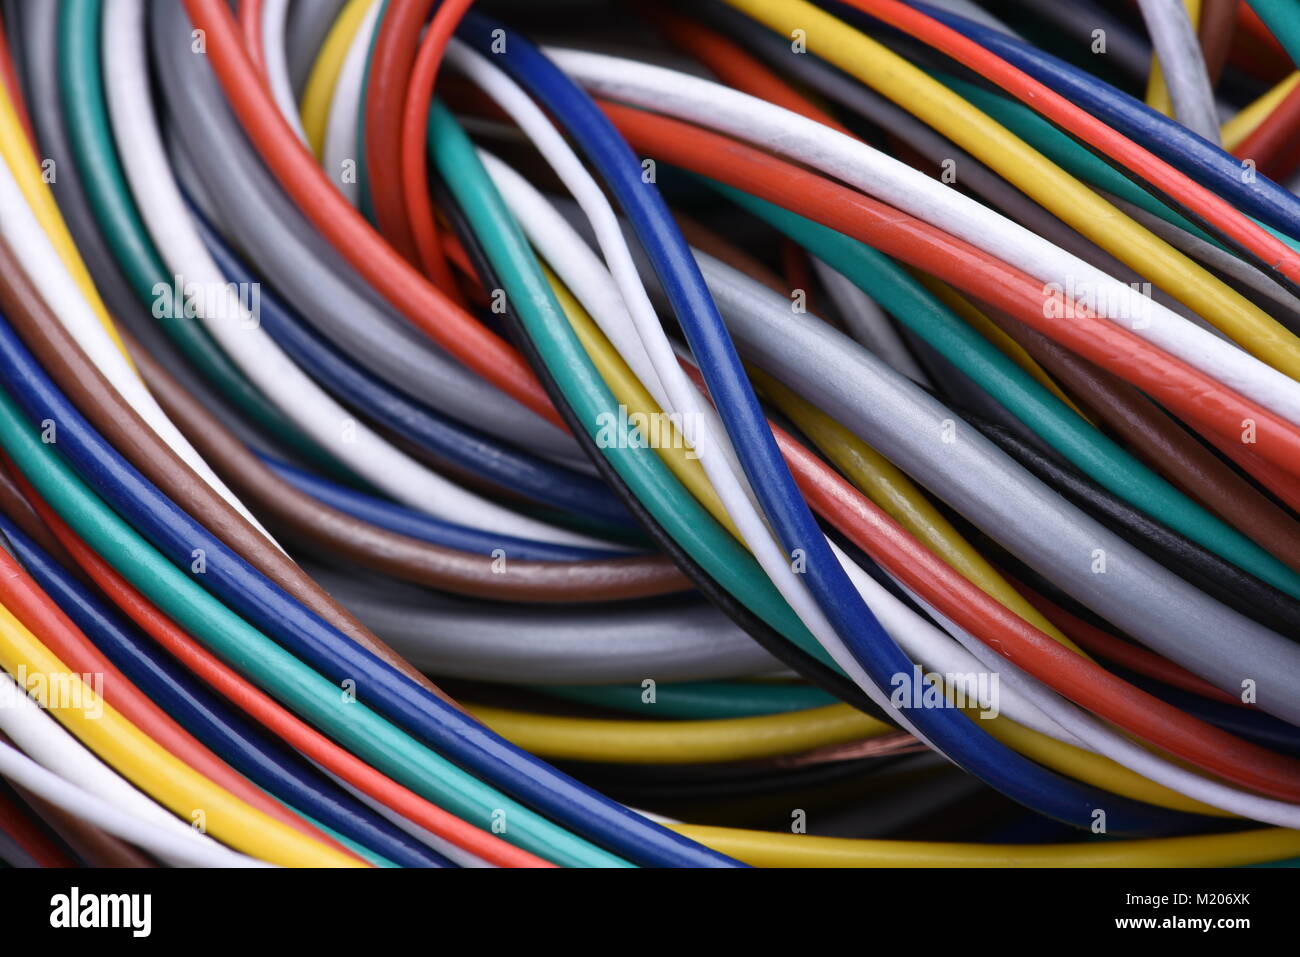 Colorful electrical cables Stock Photo